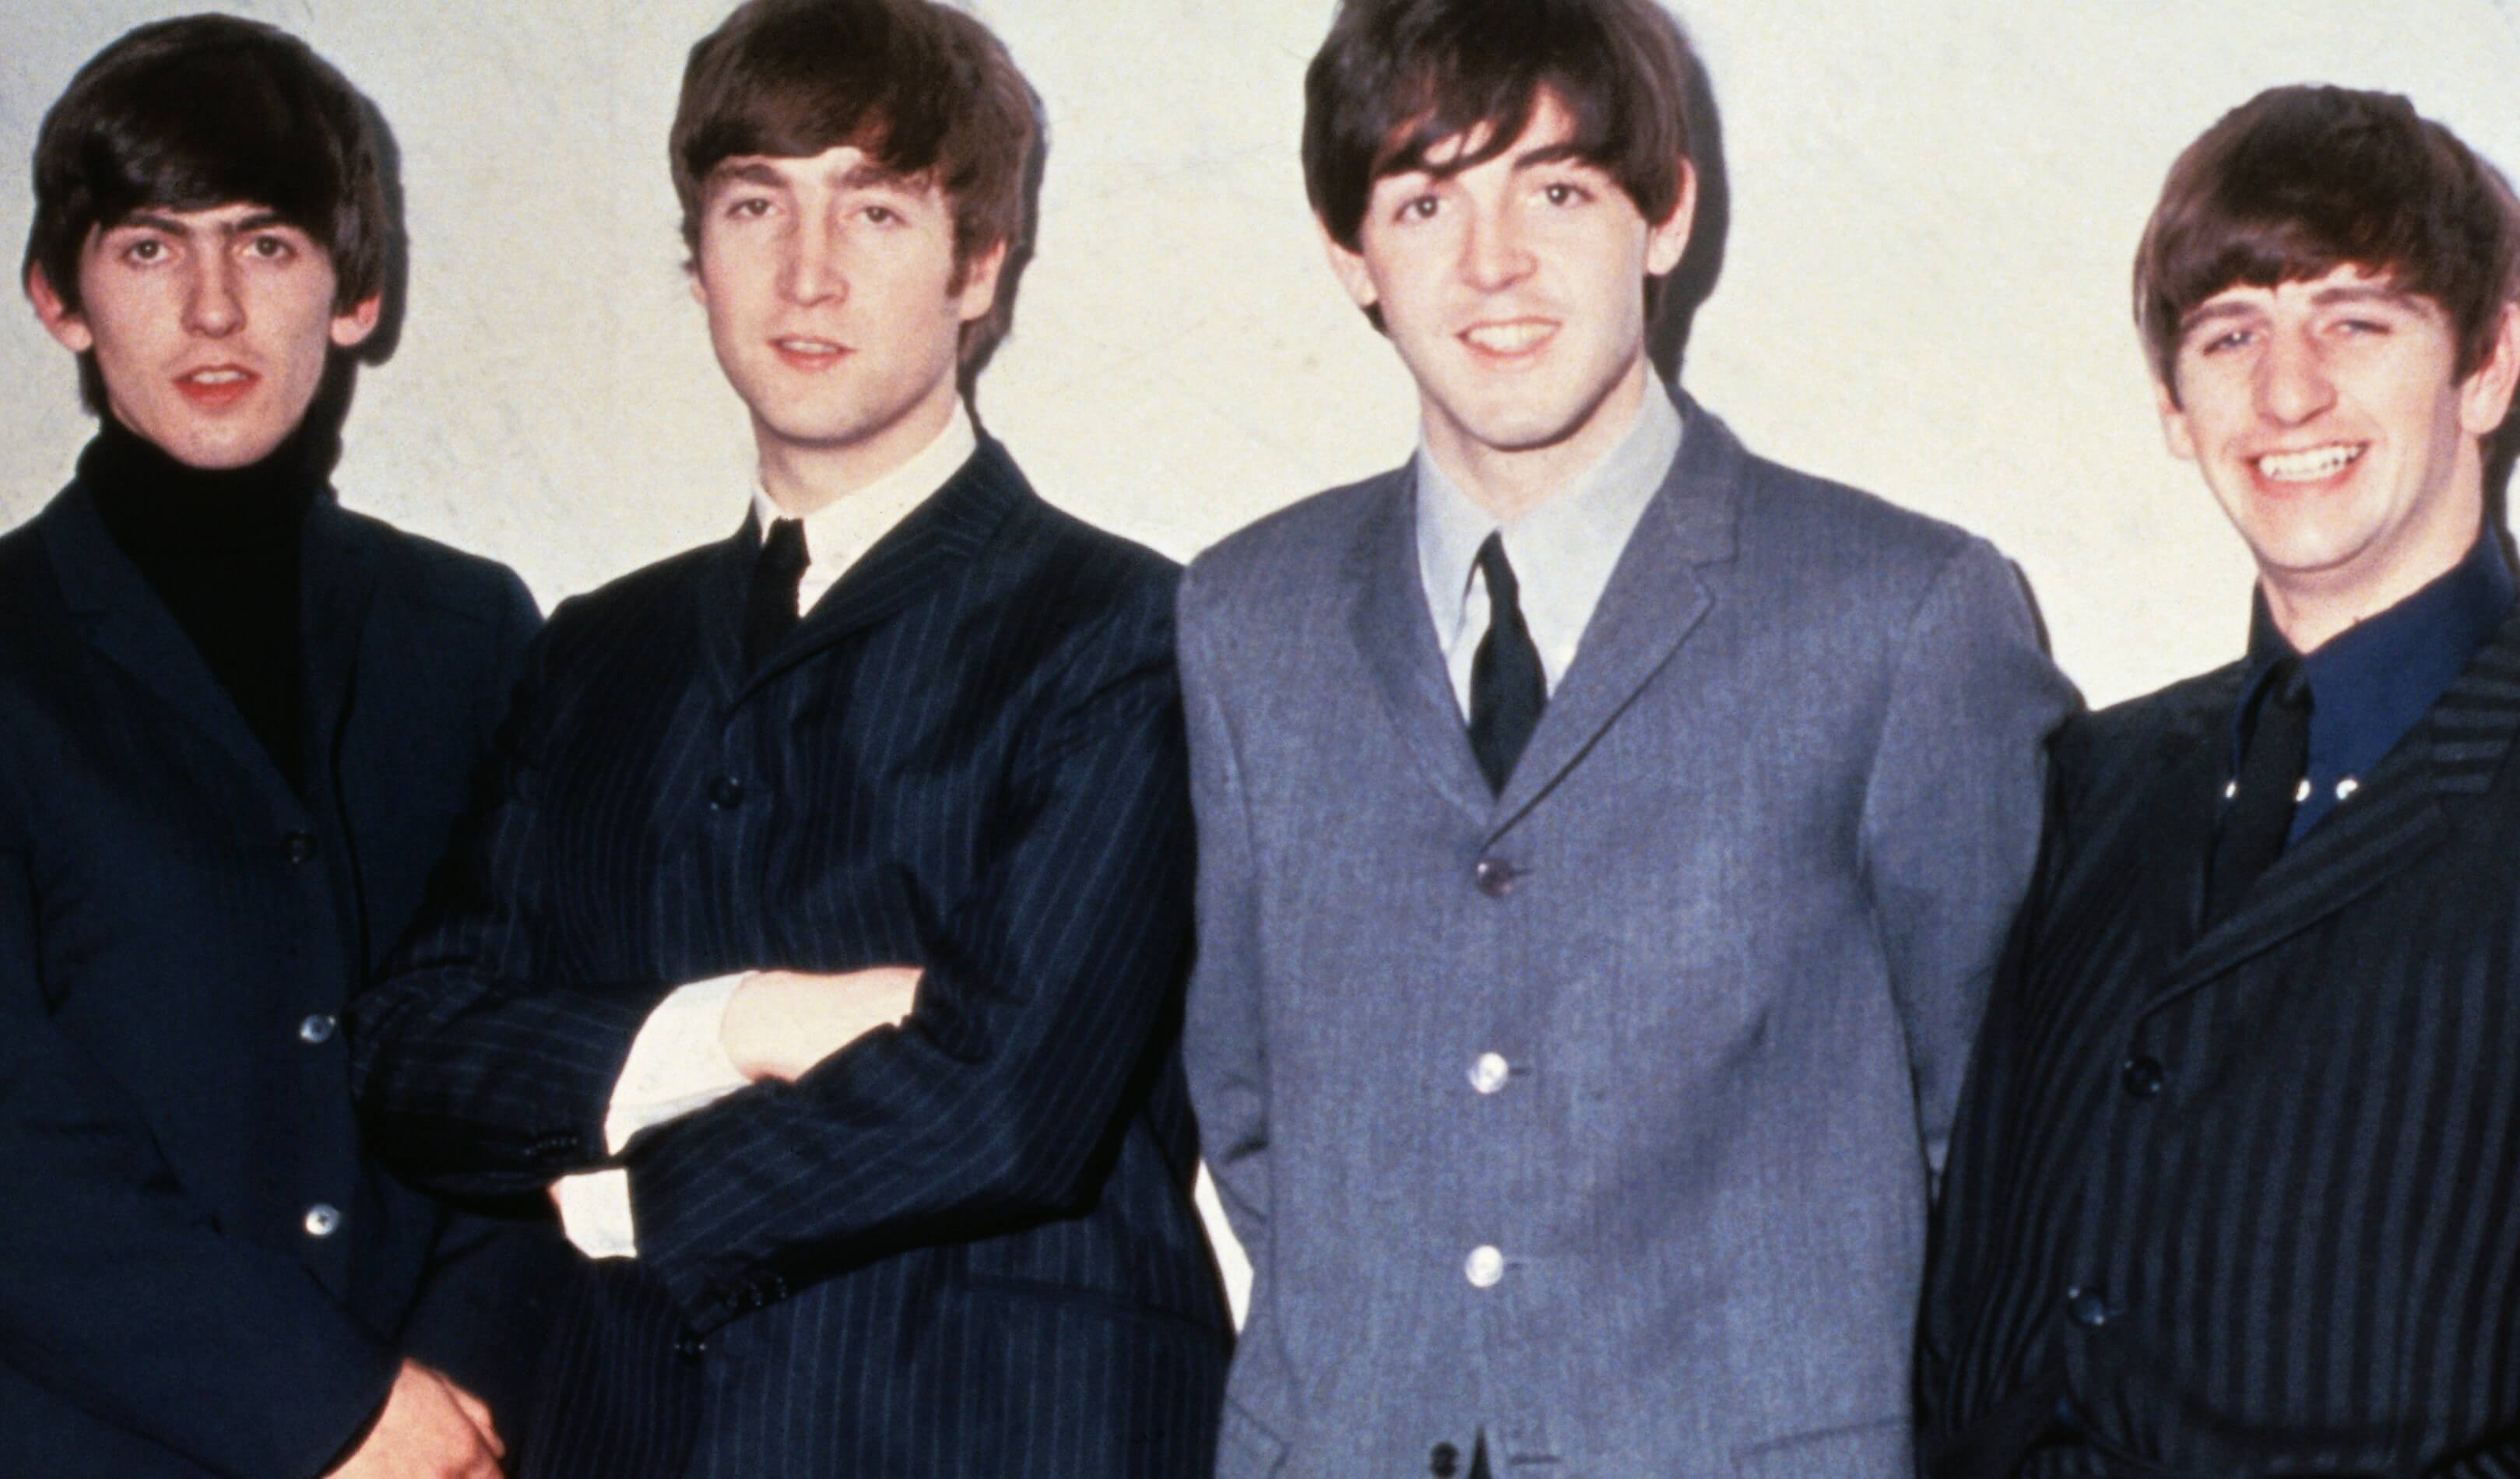 The Beatles in suits